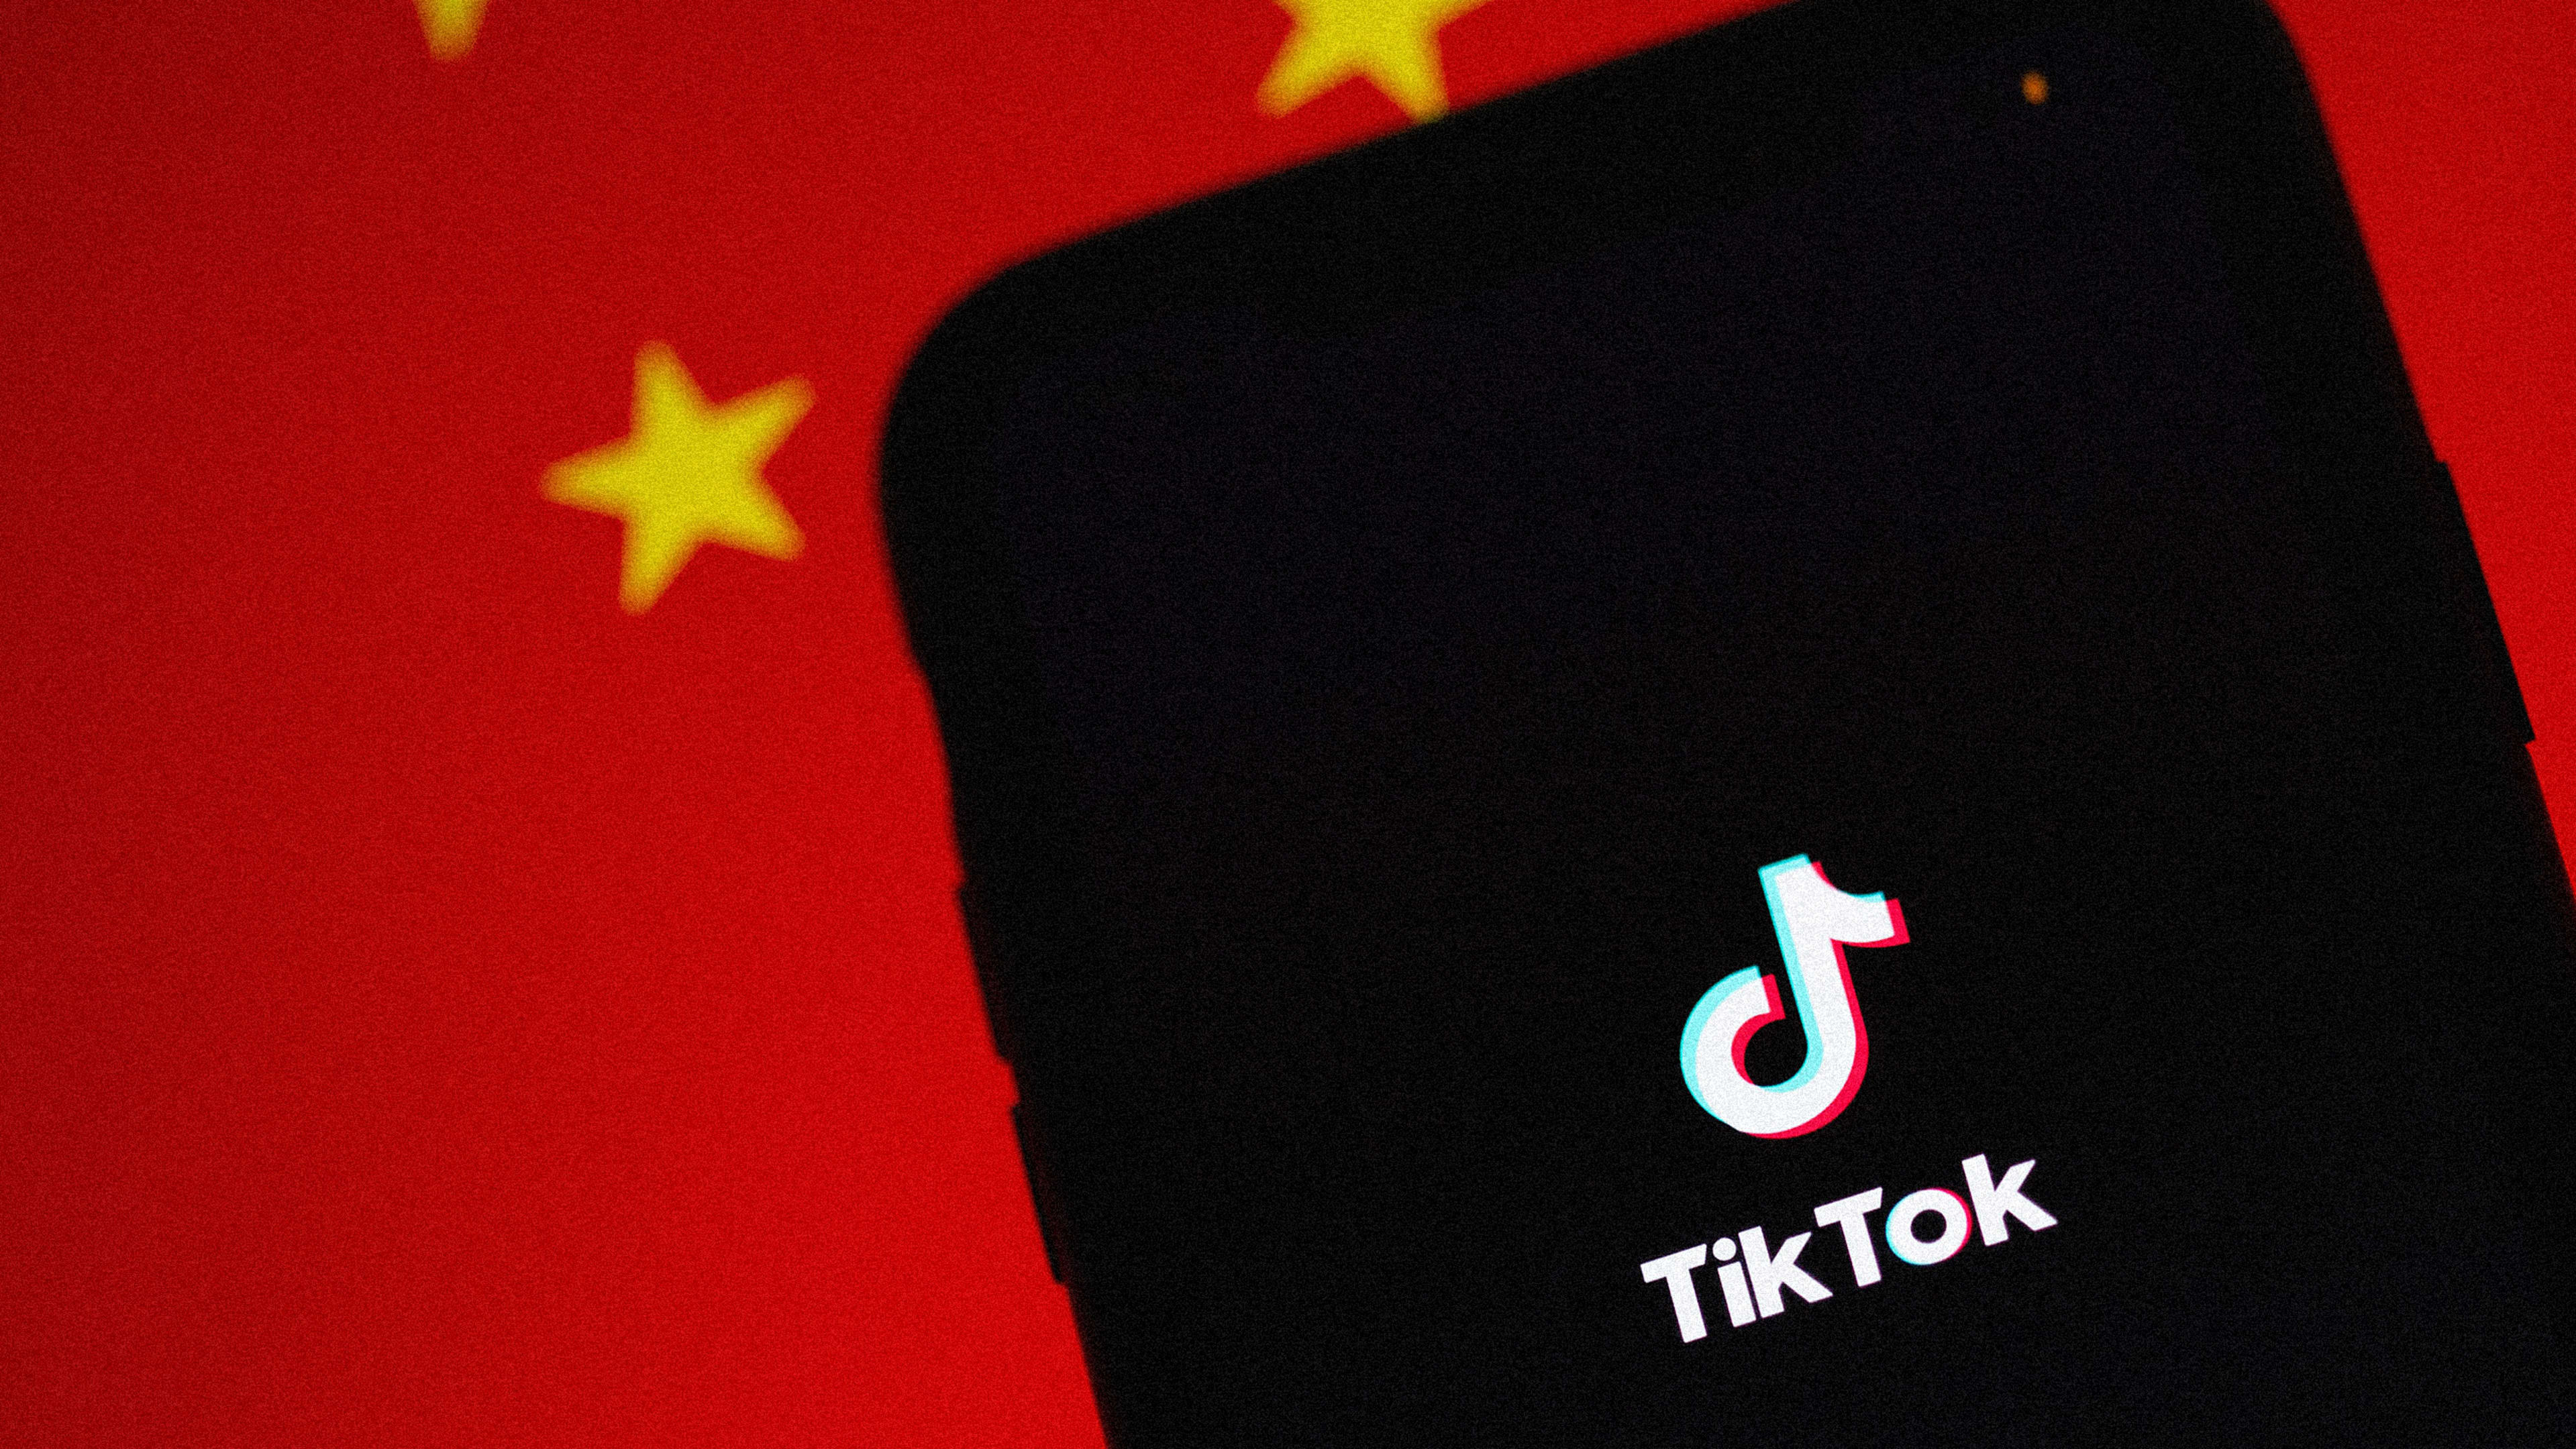 Is the U.S. banning TikTok? After this week’s woes, the situation looks more dire